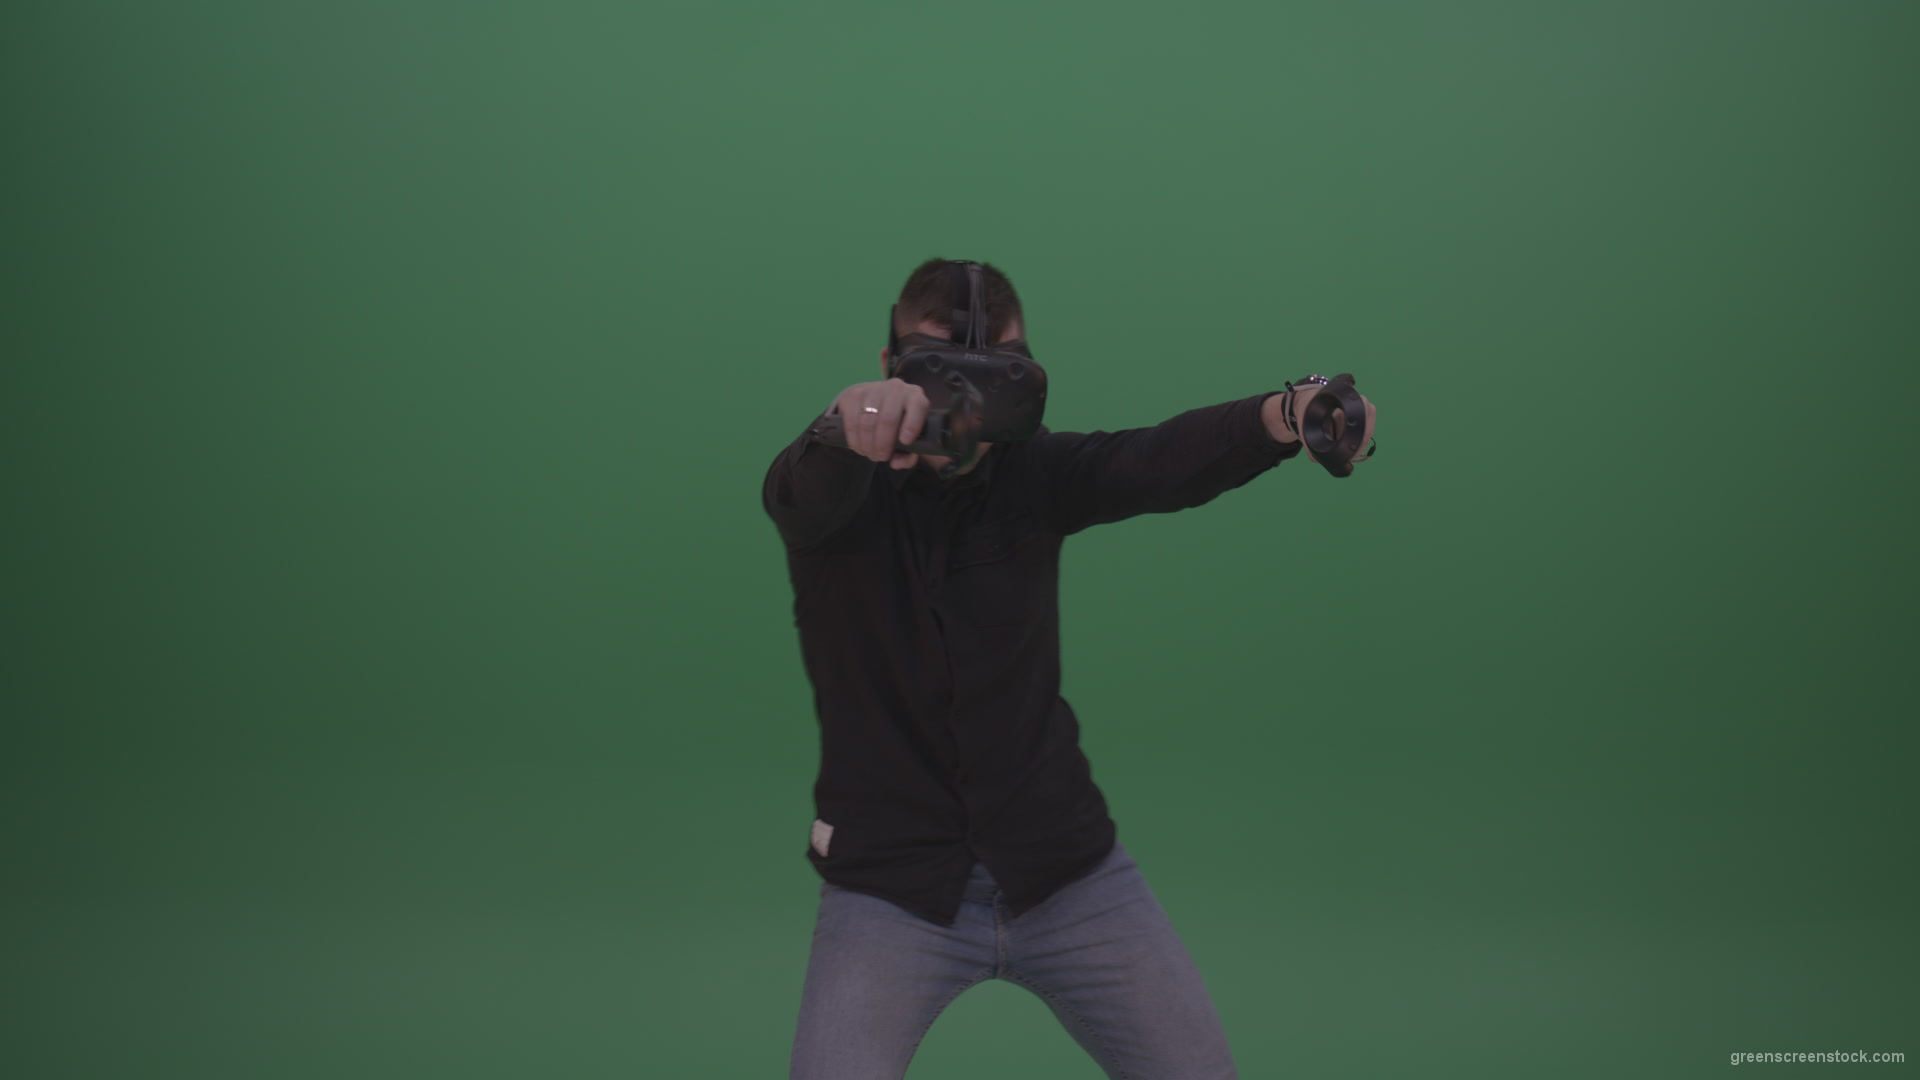 Young_Dangerous_Brunette_Man_Wearing_Black_Shirt_Shooting_Enemies_All_Around_In_Virtual_Reality_Glasses_Green_Screen_Wall_Background_008 Green Screen Stock